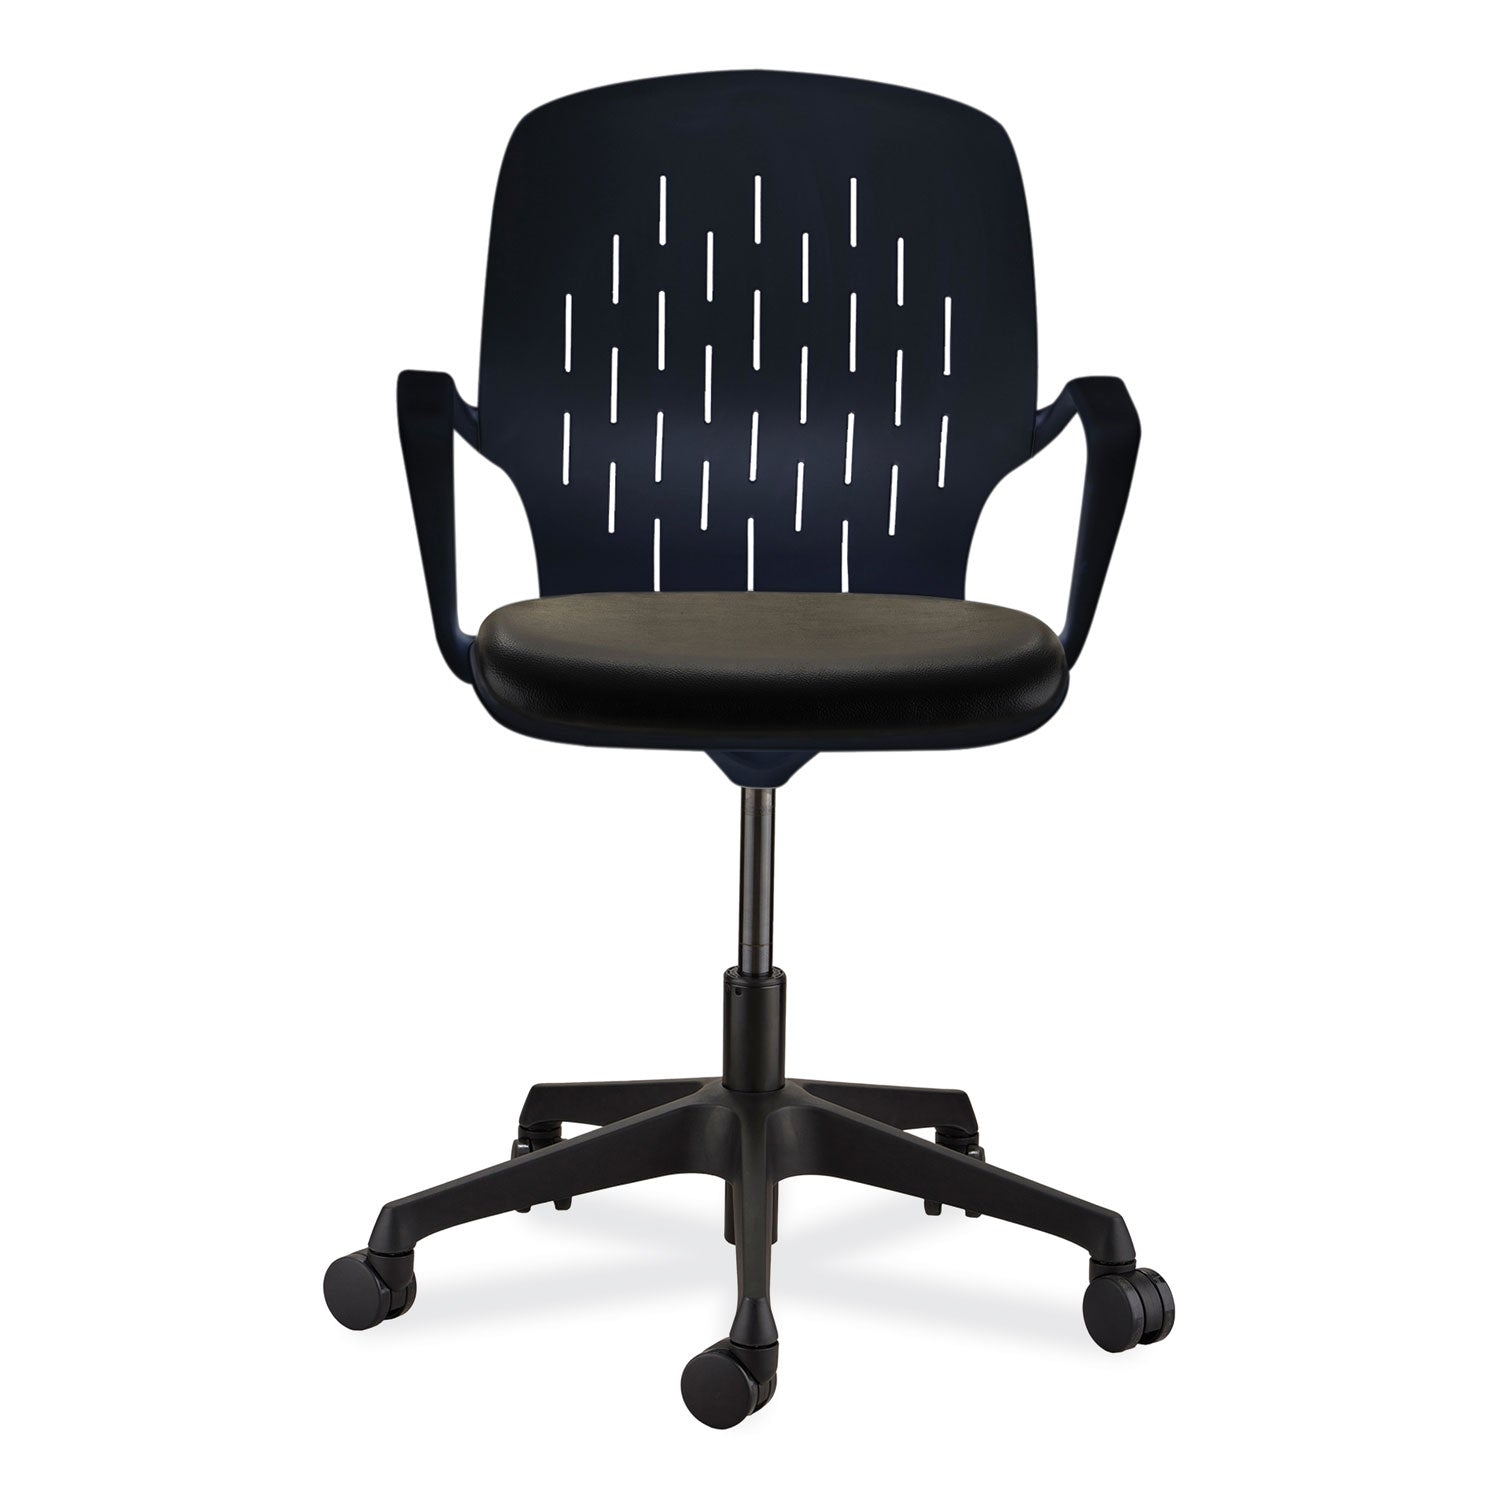 shell-desk-chair-supports-up-to-275-lb-17-to-20-seat-height-black-seat-back-black-base-ships-in-1-3-business-days_saf7013bl - 2